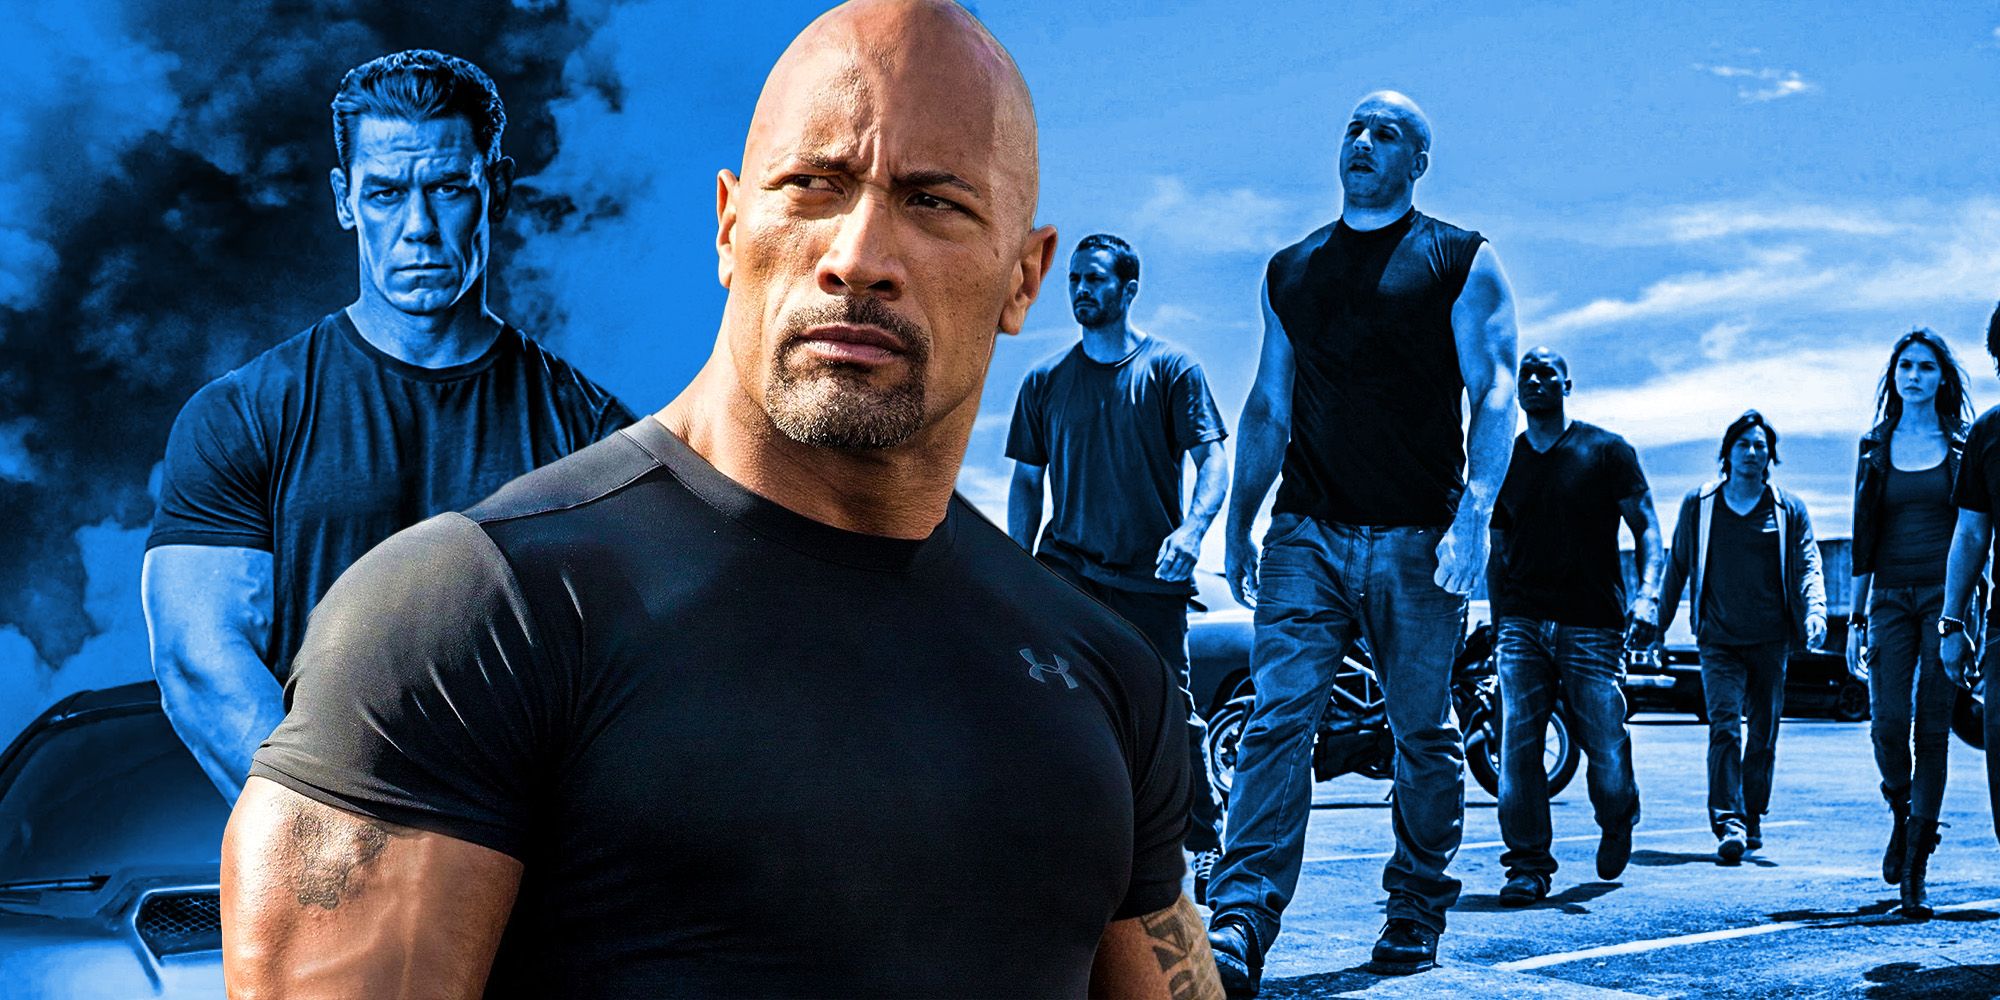 Dwayne Johnson and the Fast & Furious cast